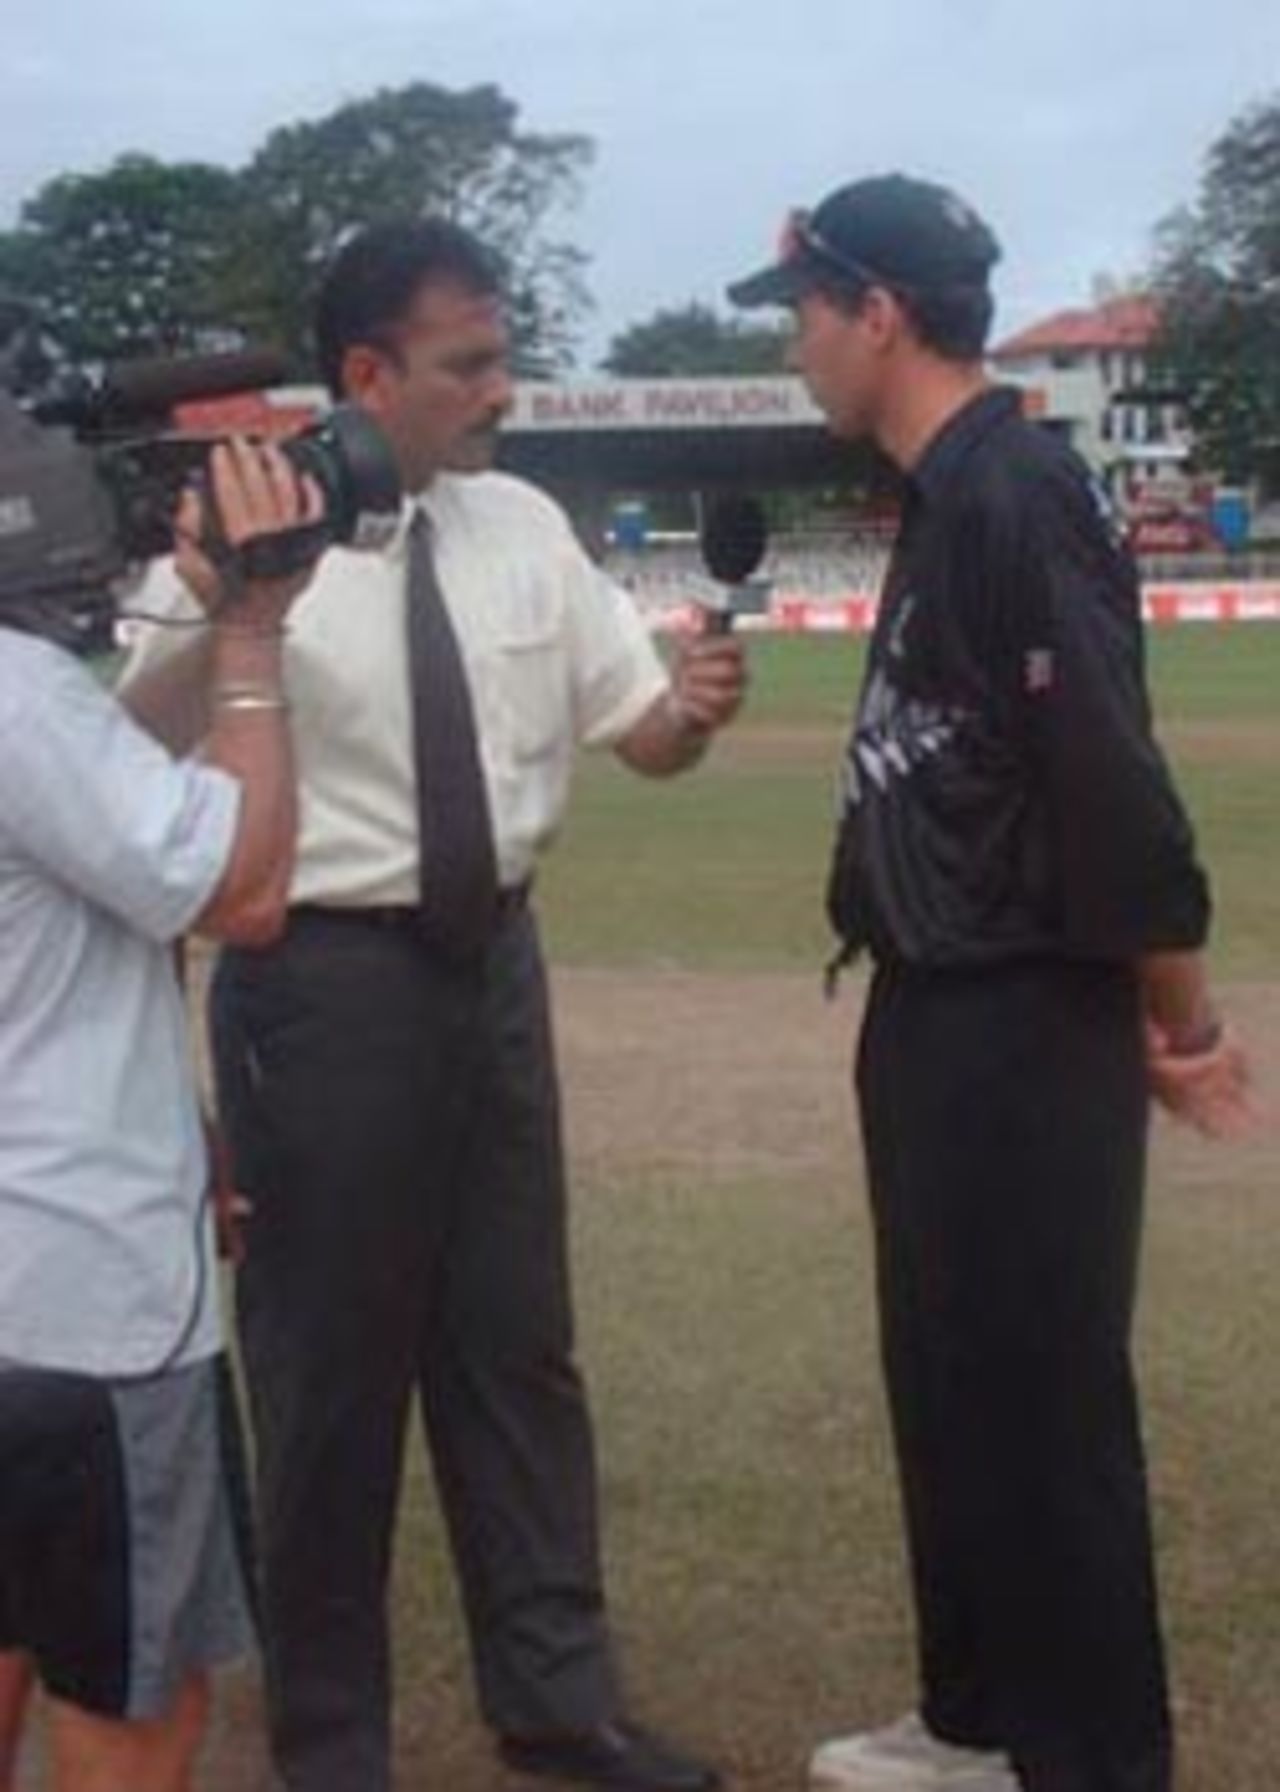 2 August 2001: Coca-Cola Cup (Sri Lanka) 2001, 9th Match, India v New Zealand, Sinhalese Sports Club, Colombo